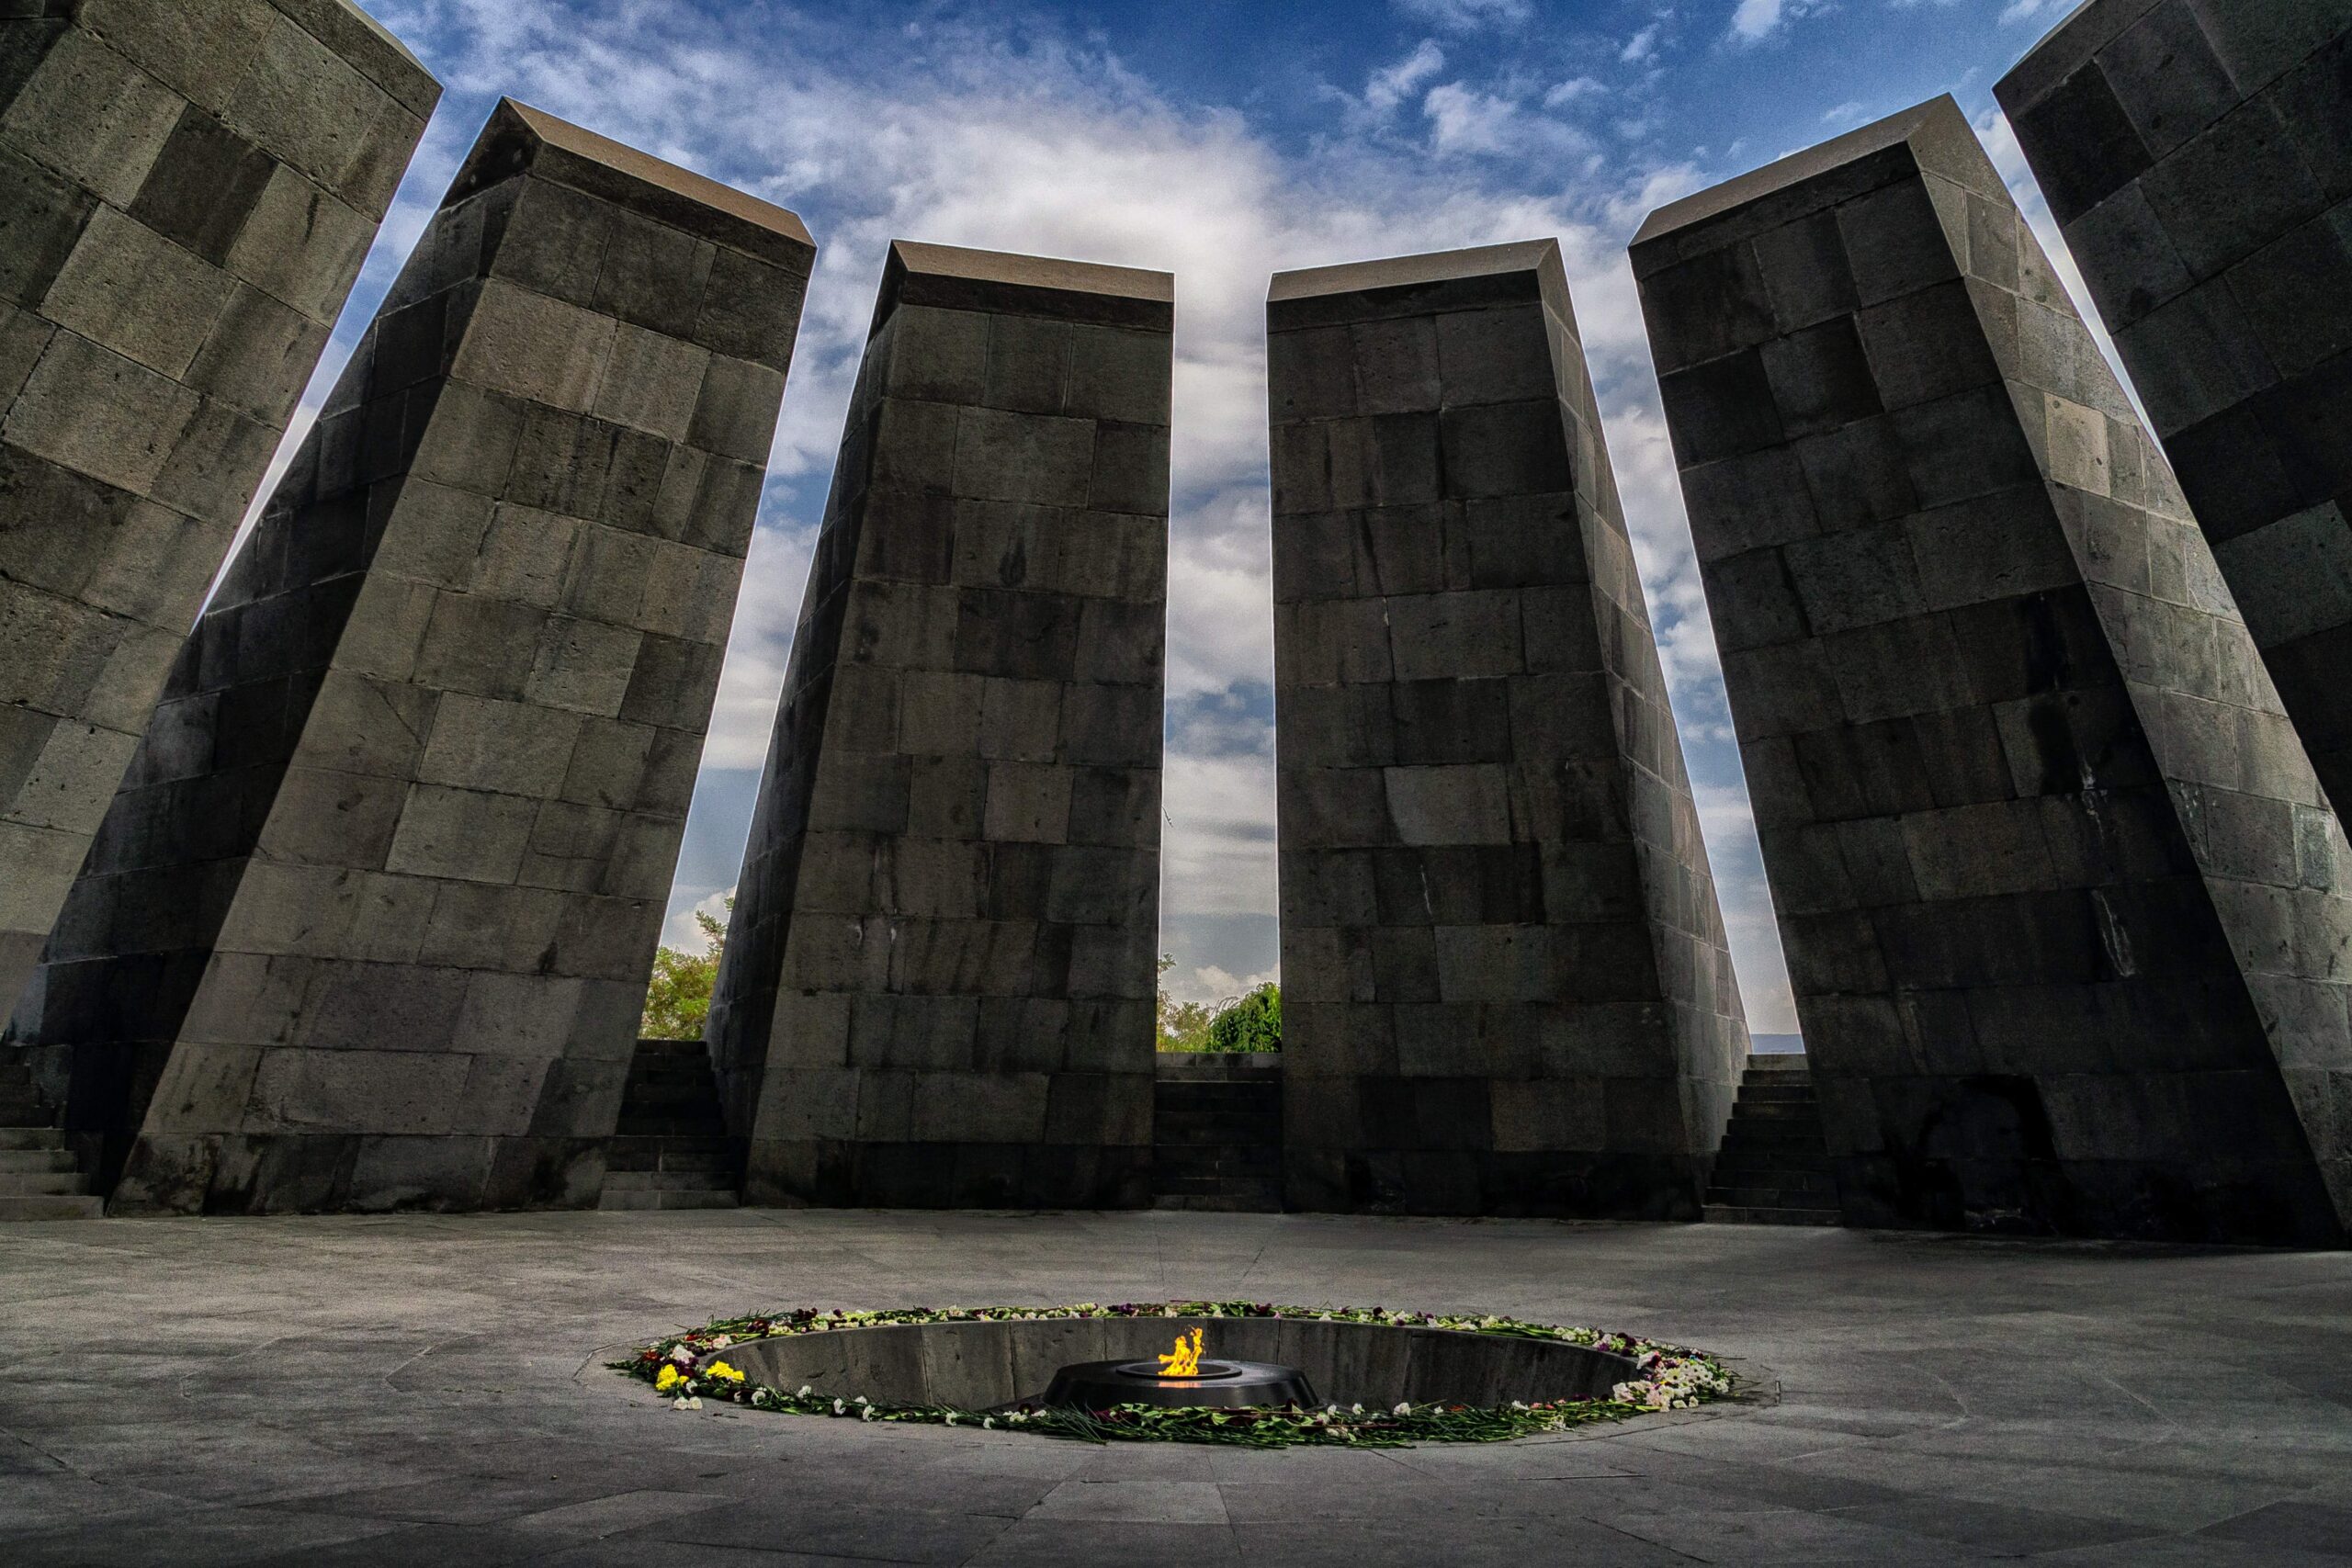 A Day to Remember: 108 Years Since the Armenian Genocide